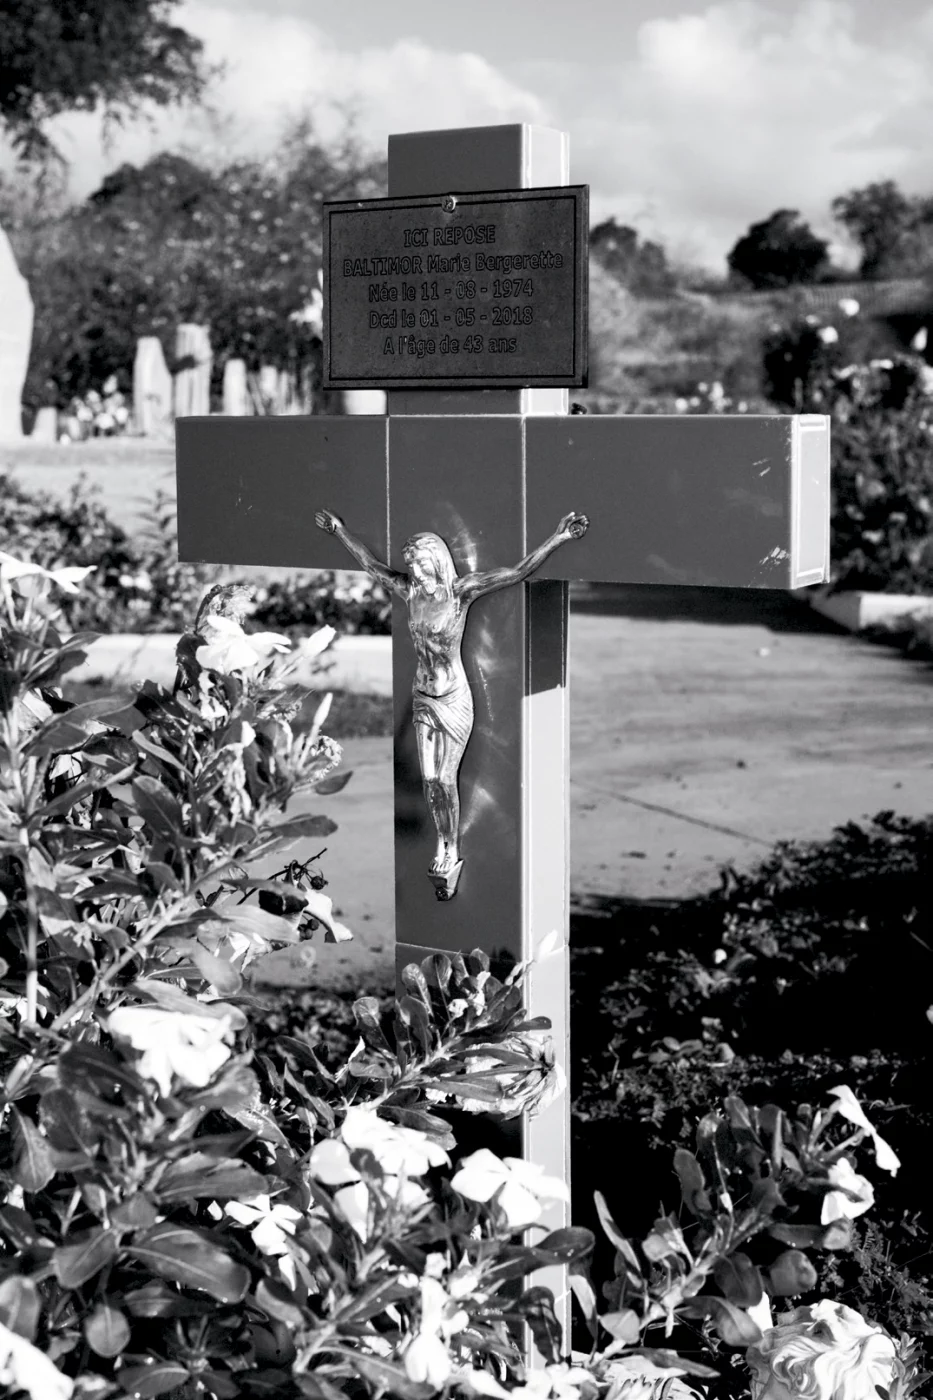 Laia Abril. Case 5 Marie Bergerette Baltimor, RIP 1974 / 2018, Paysager cemetery, from Feminicides series, 2019. Courtesy of the artist.